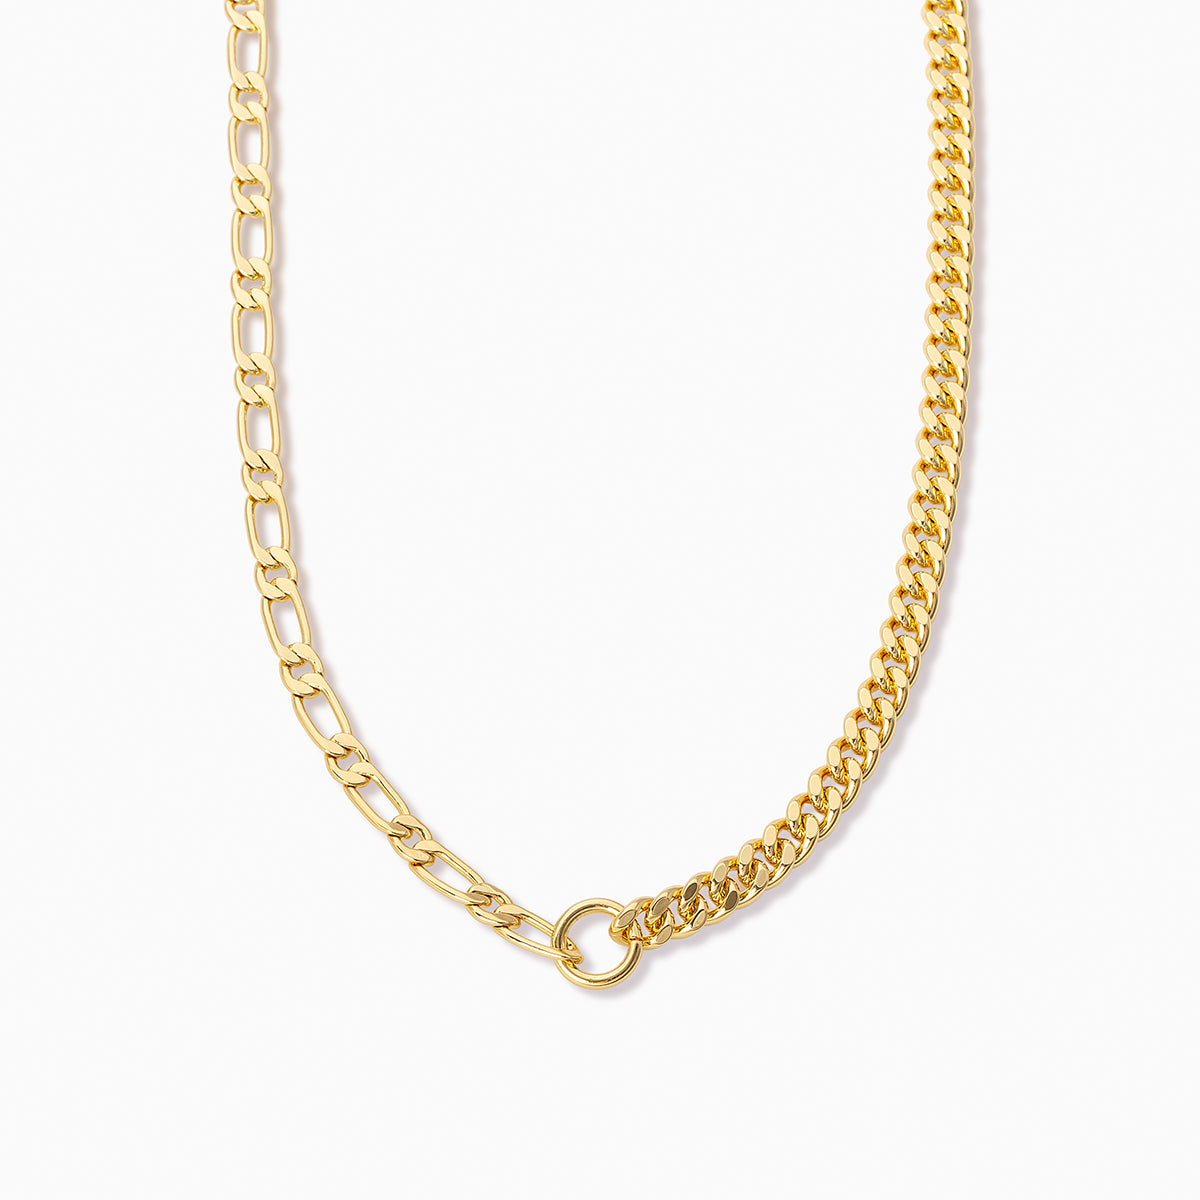 Breadwinner Chain Necklace | Gold | Product Image | Uncommon James